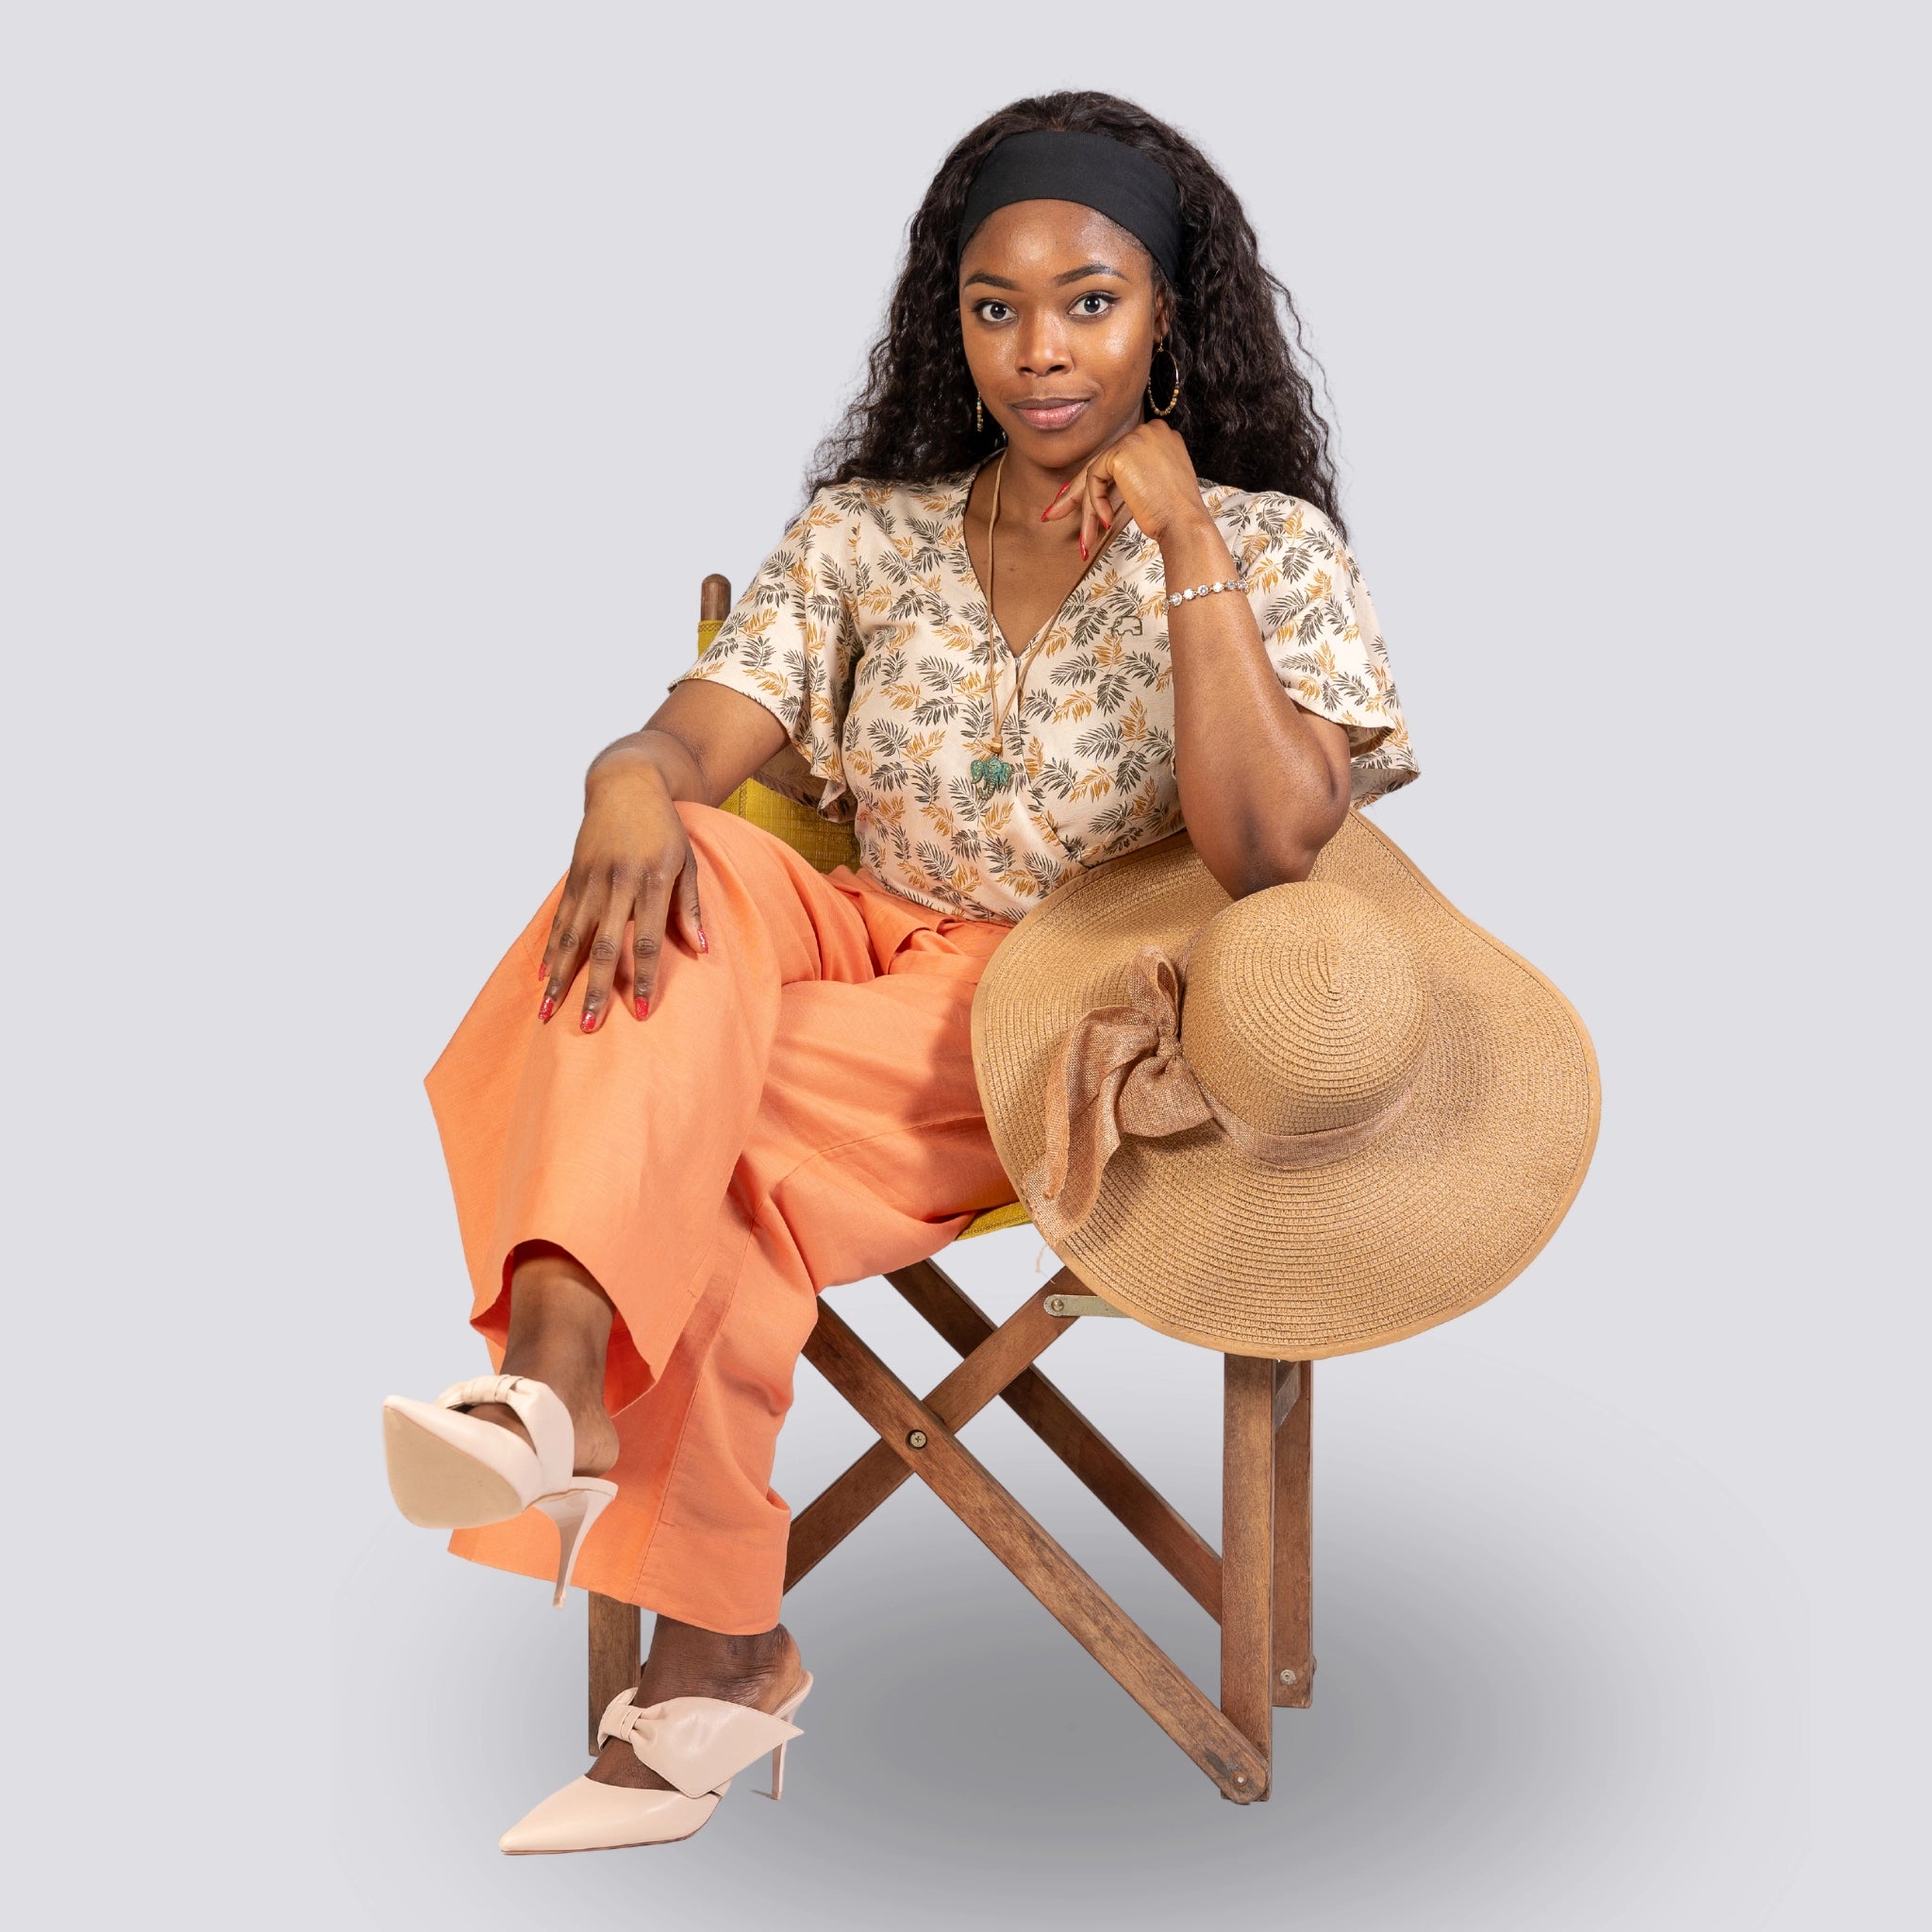 A woman sits on a wooden stool, wearing a ChicPalms Women's Eco-Friendly Wrap Top - Biscuit Bliss by Karee, orange pants, headband, and holding a straw hat, with one shoe off.